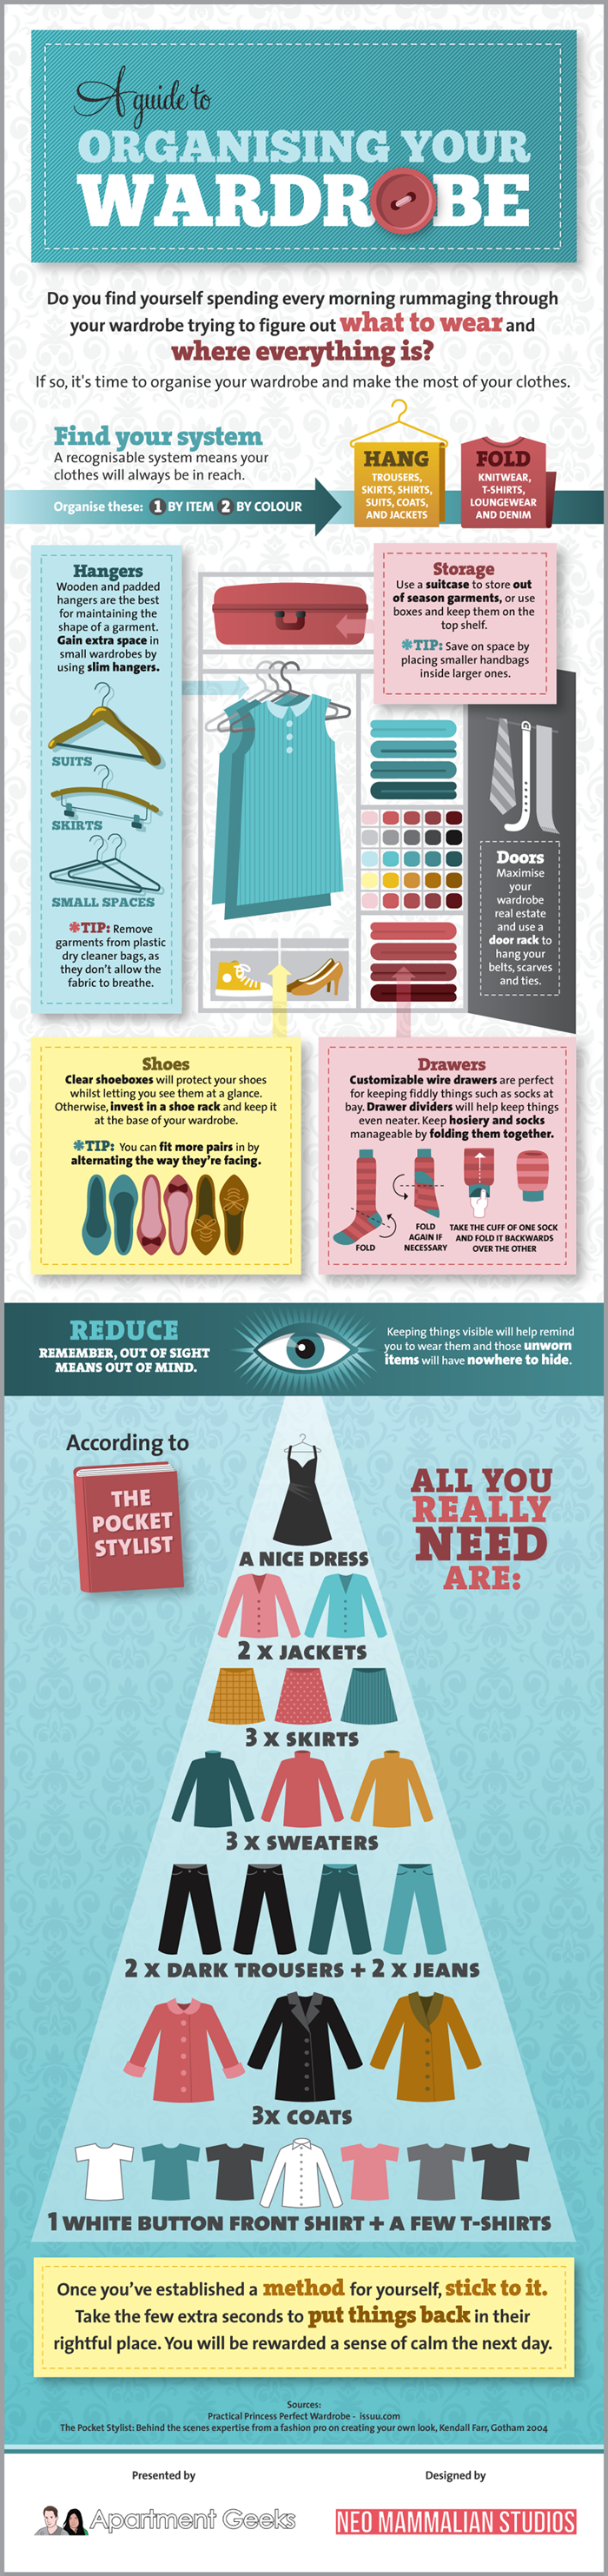 A Guide to Organizing Your Wardrobe